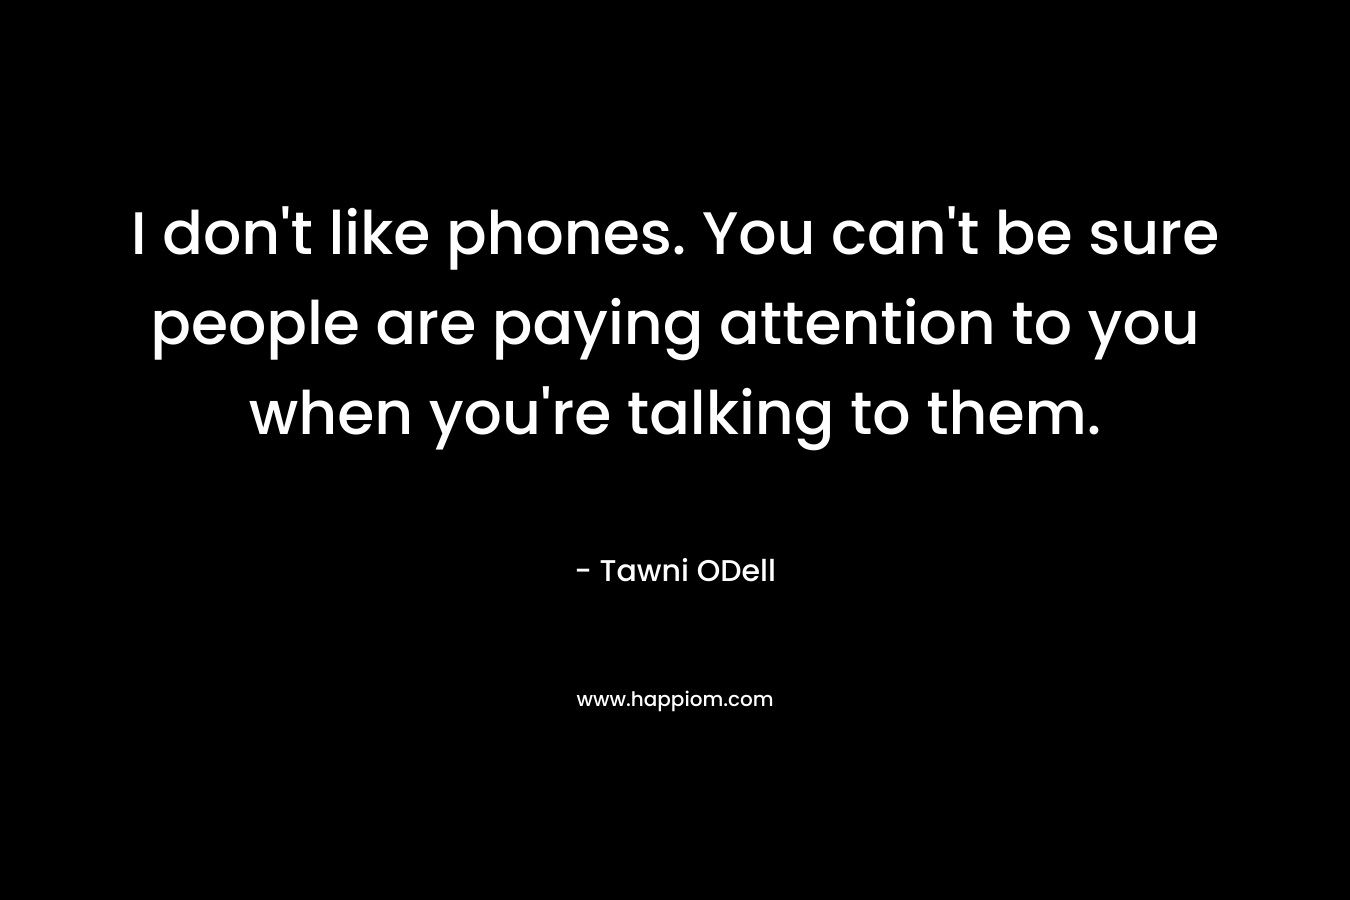 I don't like phones. You can't be sure people are paying attention to you when you're talking to them.